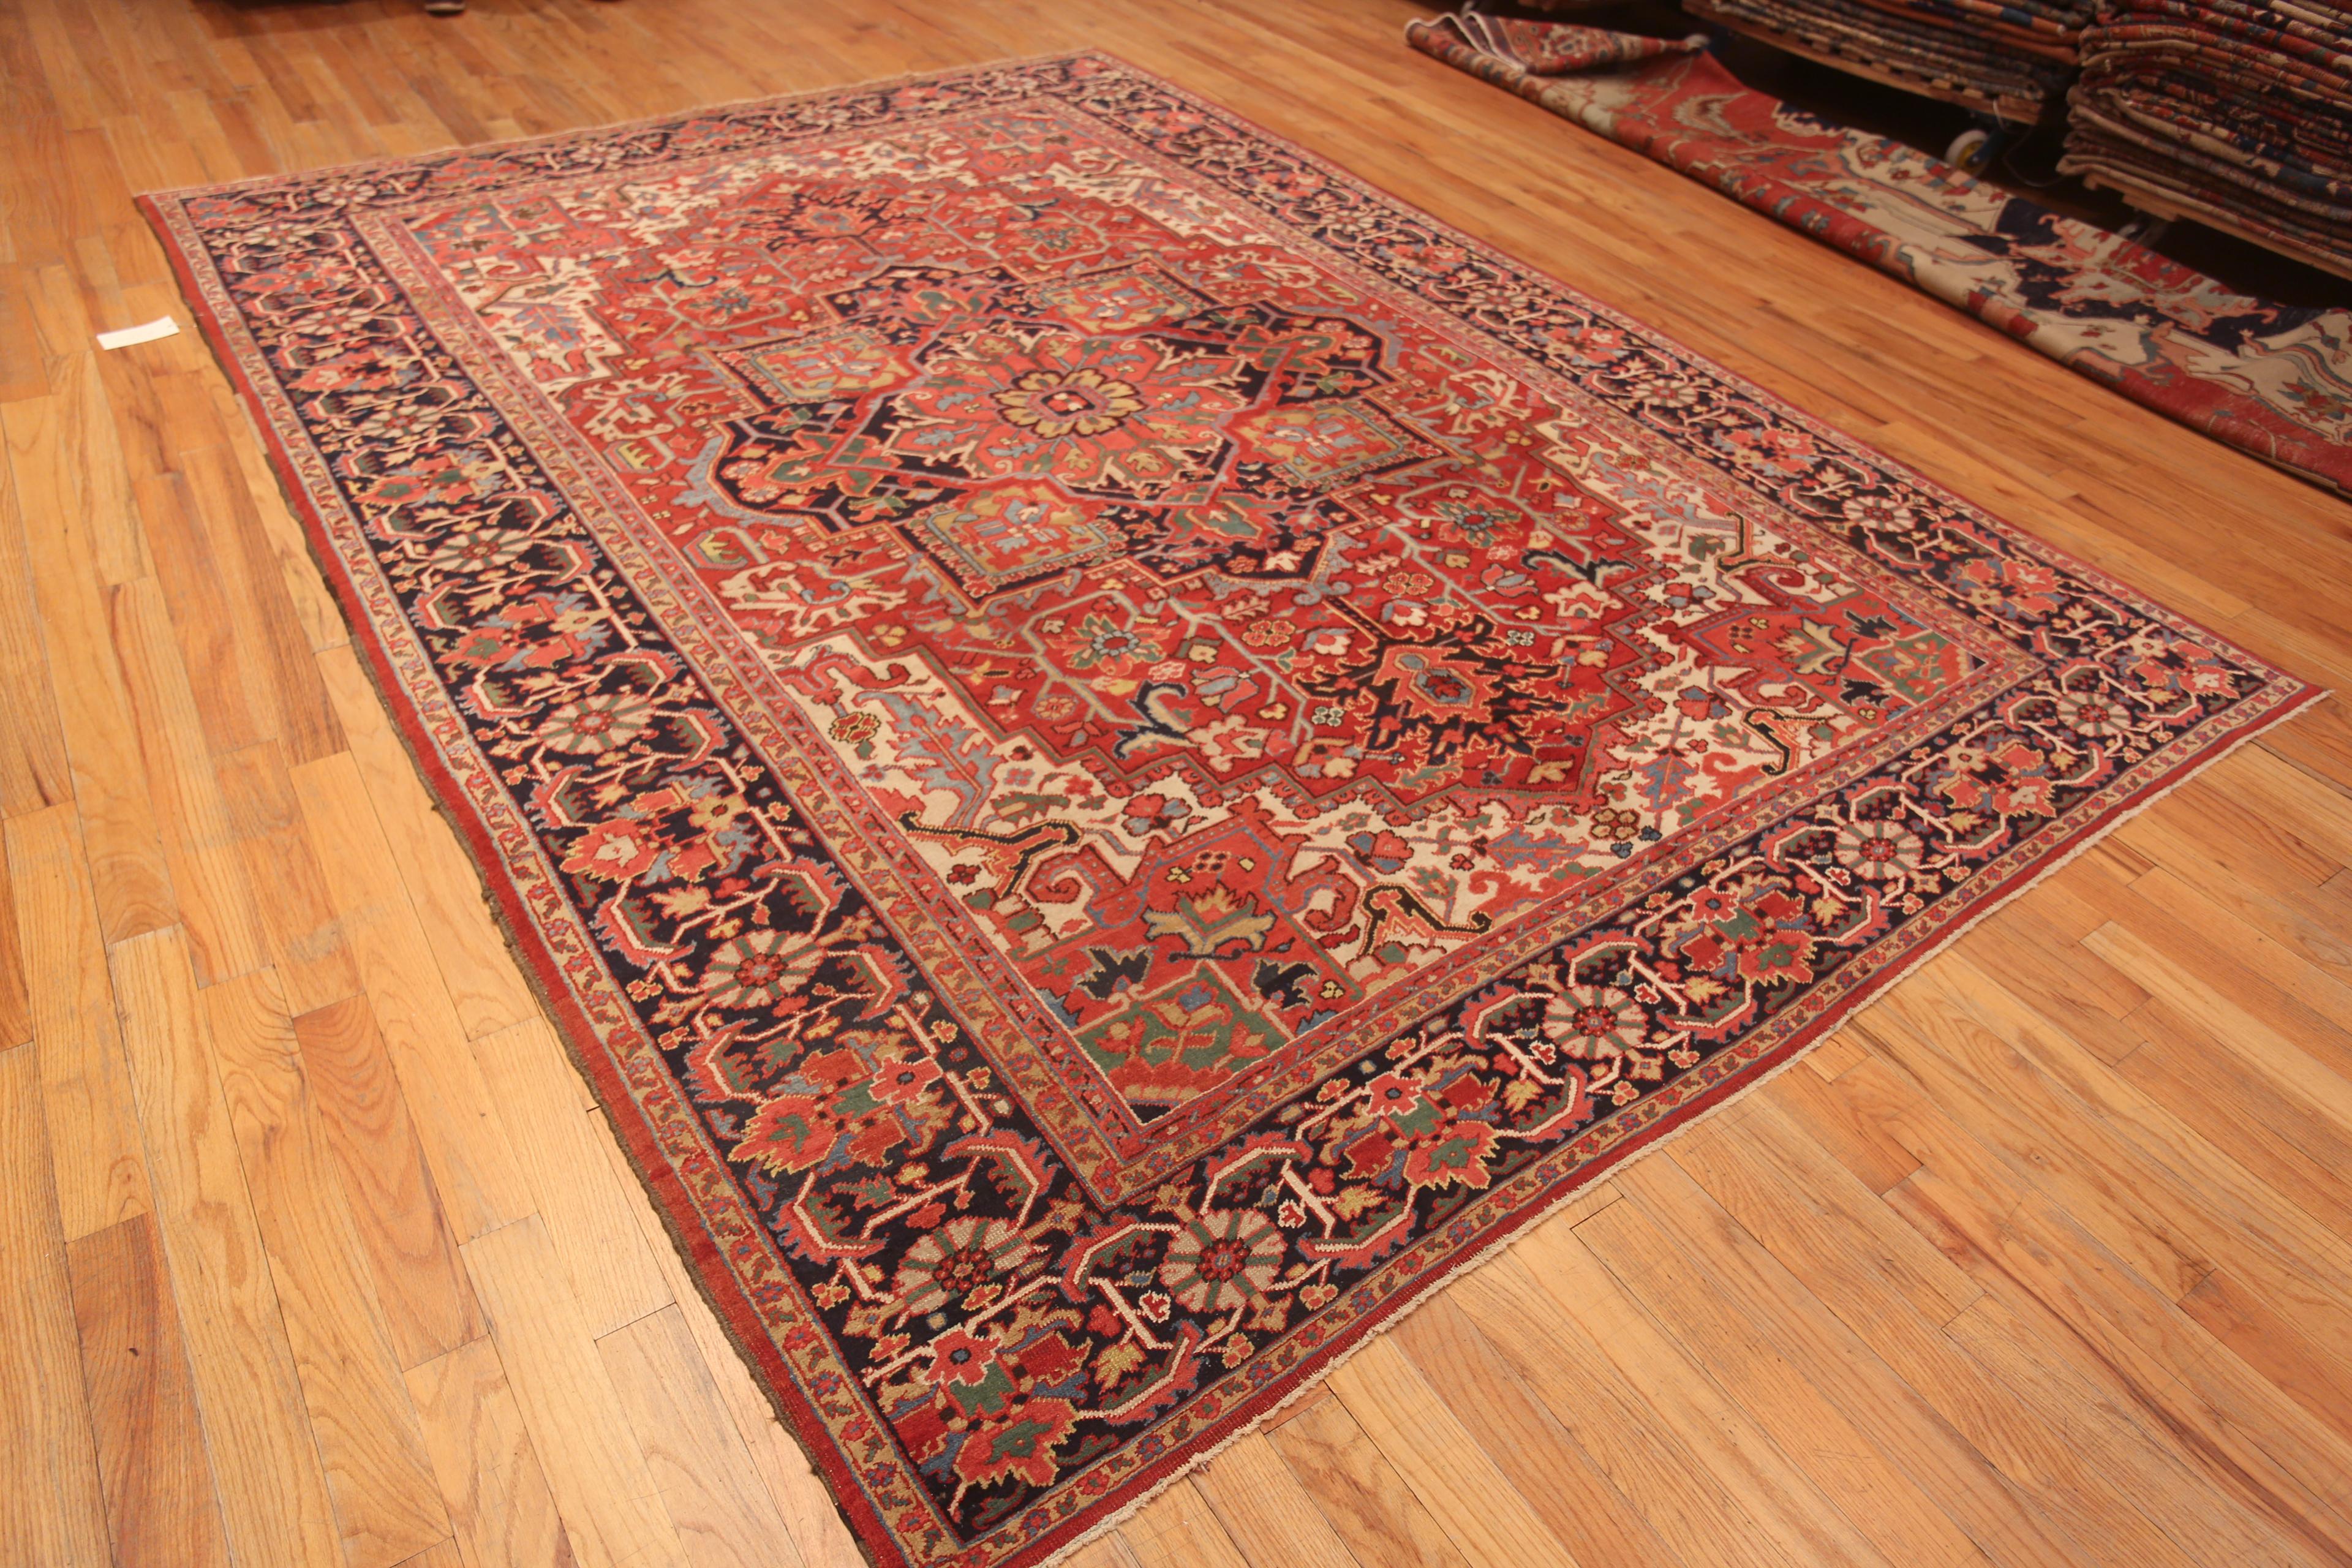 Hand-Knotted Extremely Impressive Antique Red Medallion Persian Heriz Rug 8'9